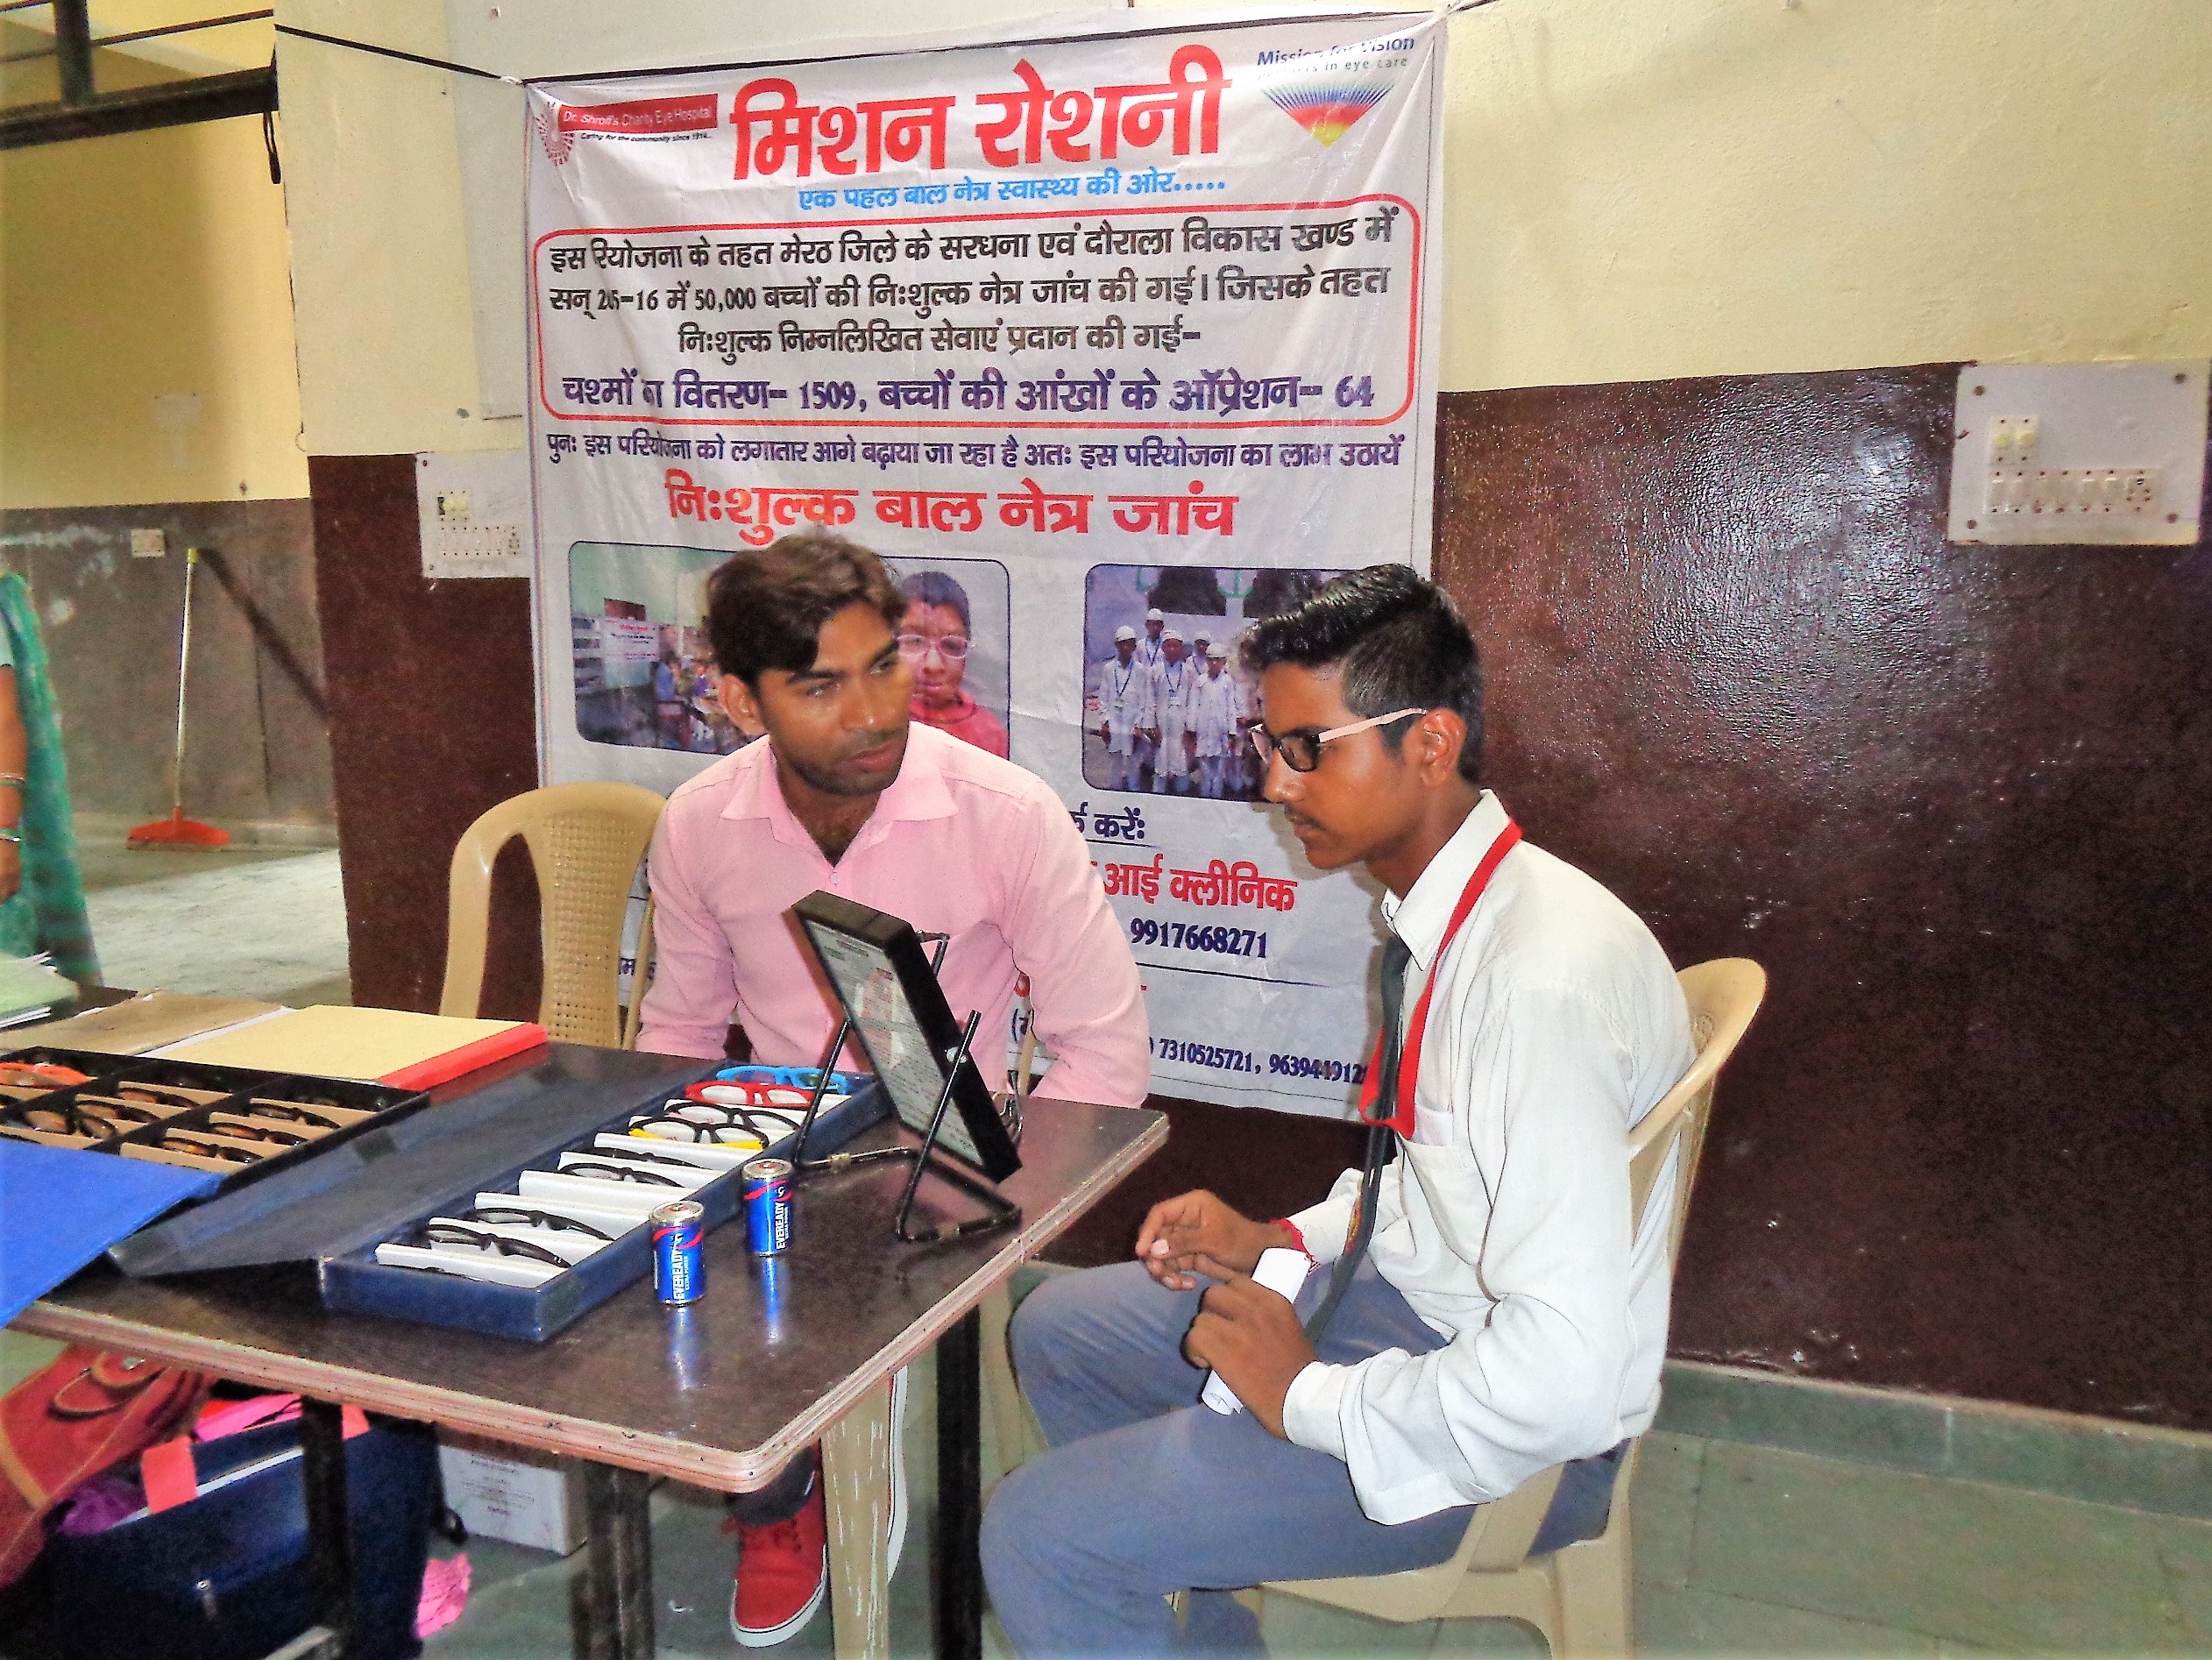 School eye health project in Meerut district, Uttar Pradesh. INDIA (c)Mission for Vision